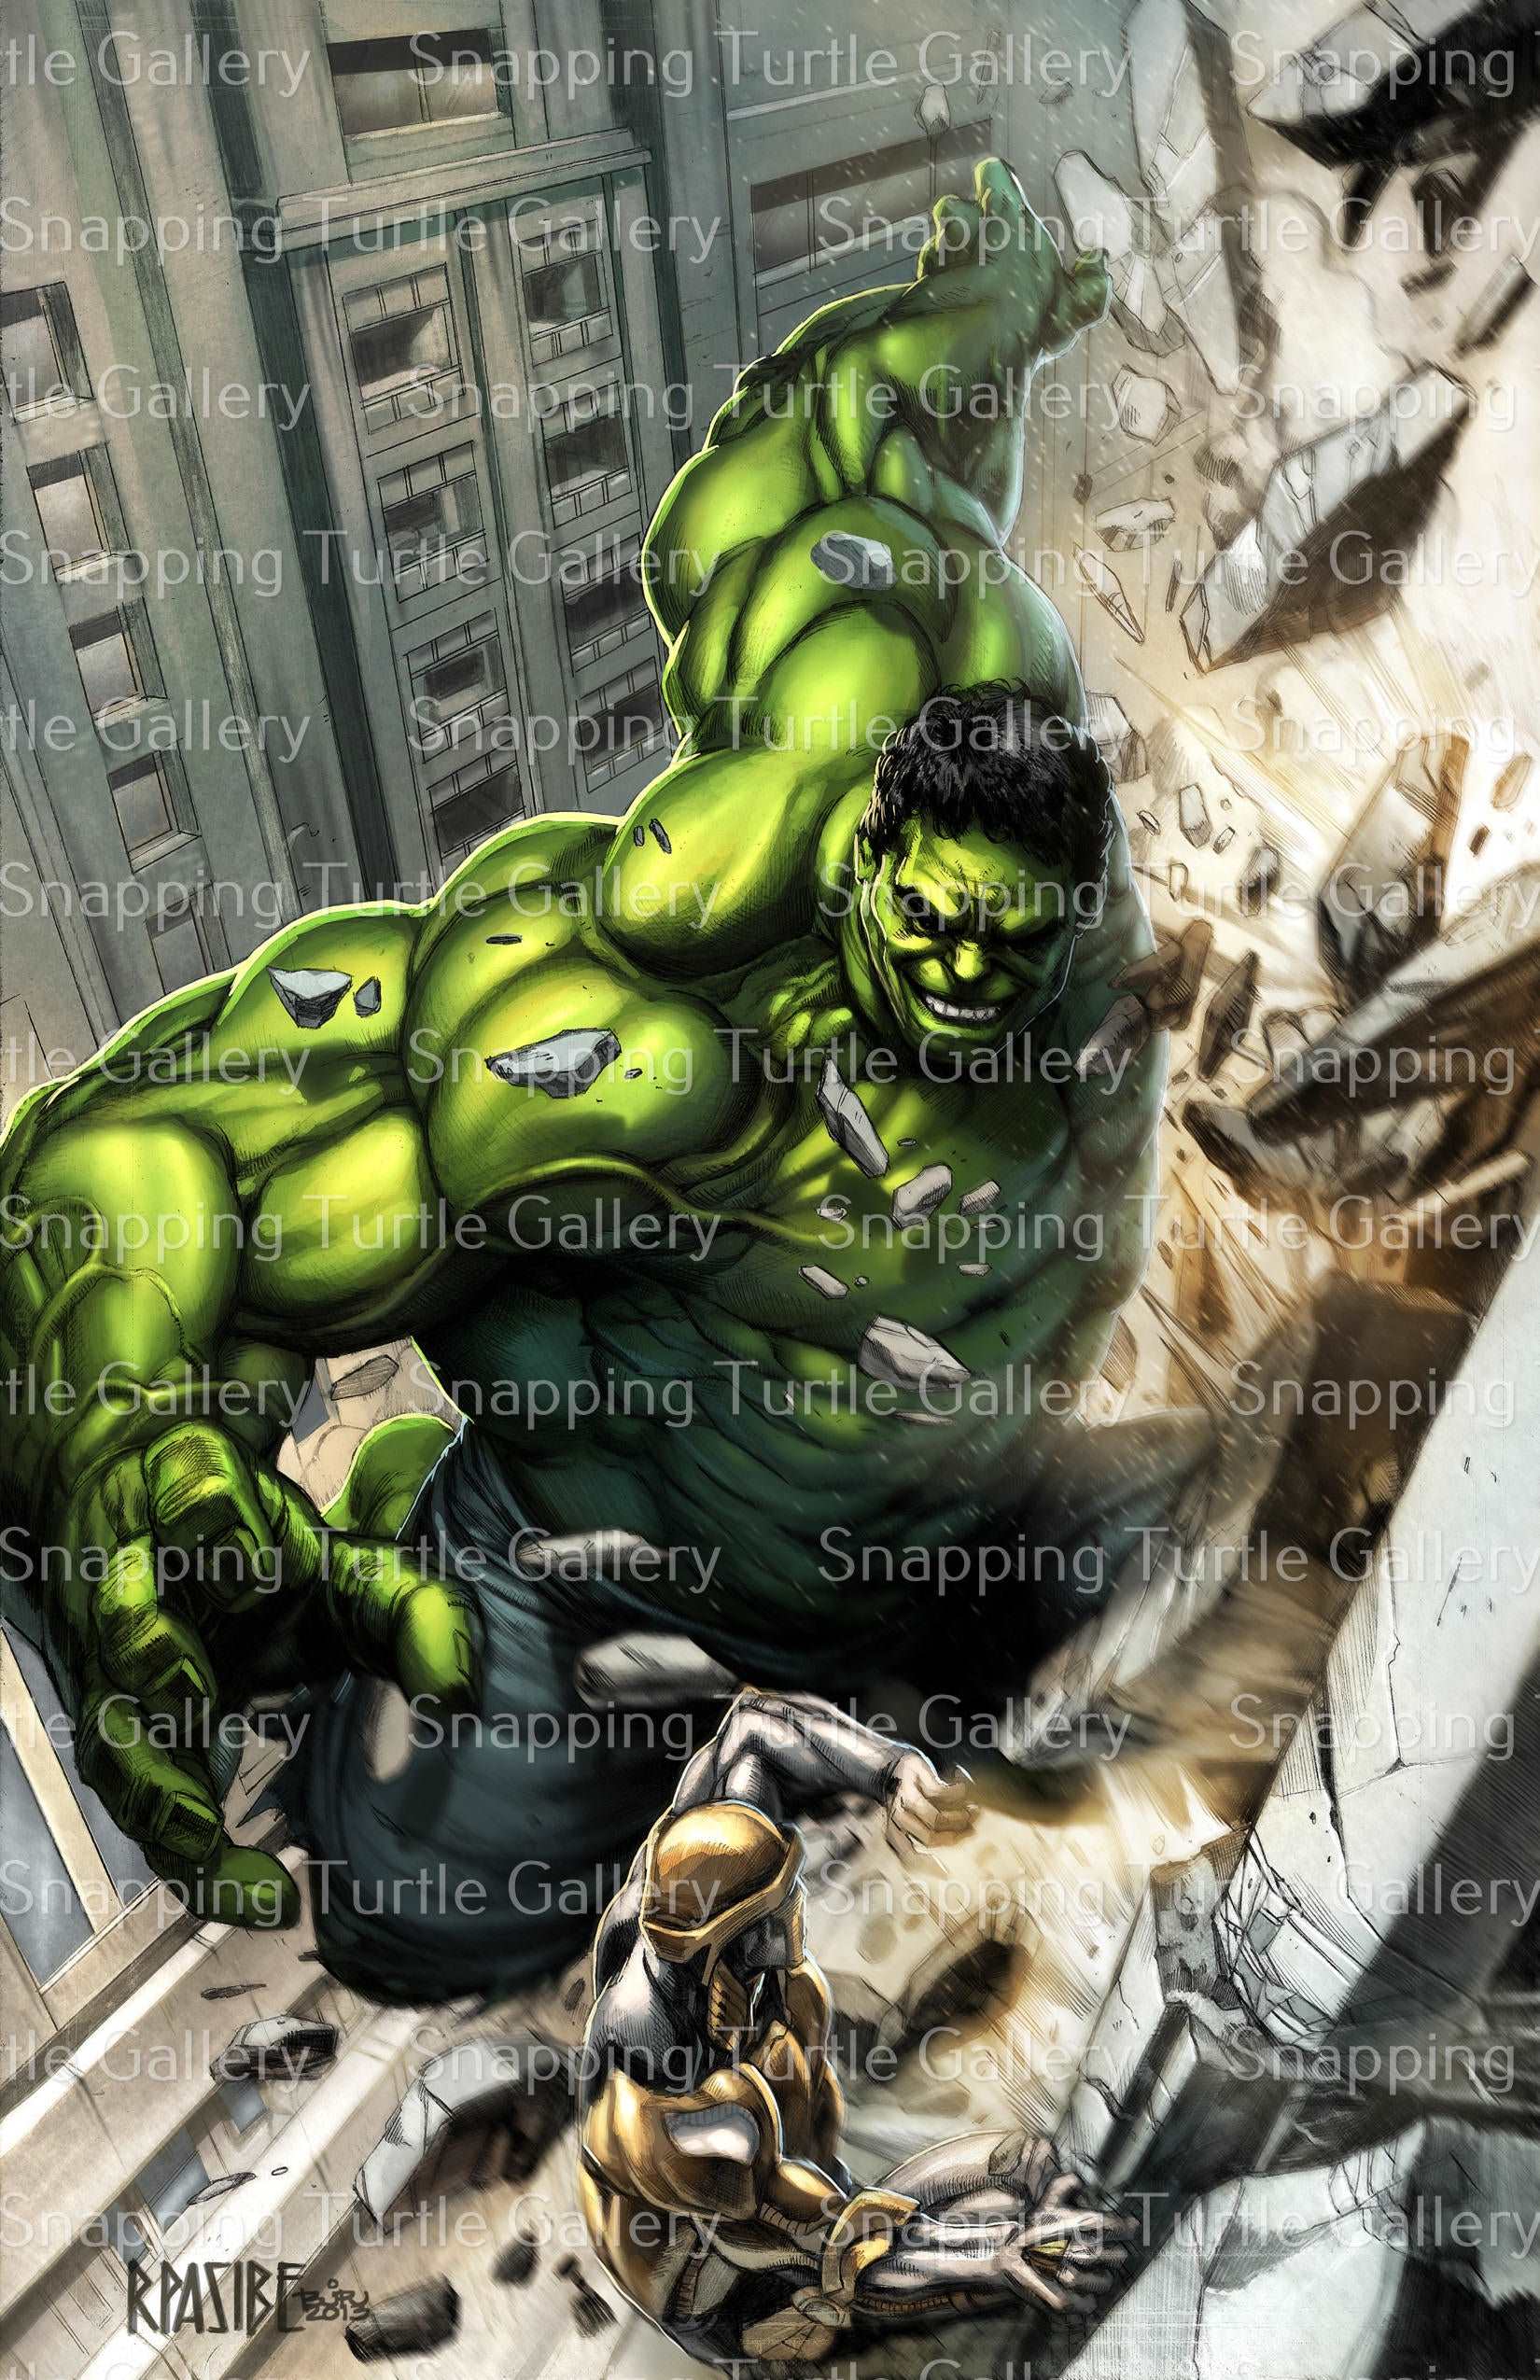 Avenging Hulk - Snapping Turtle Gallery